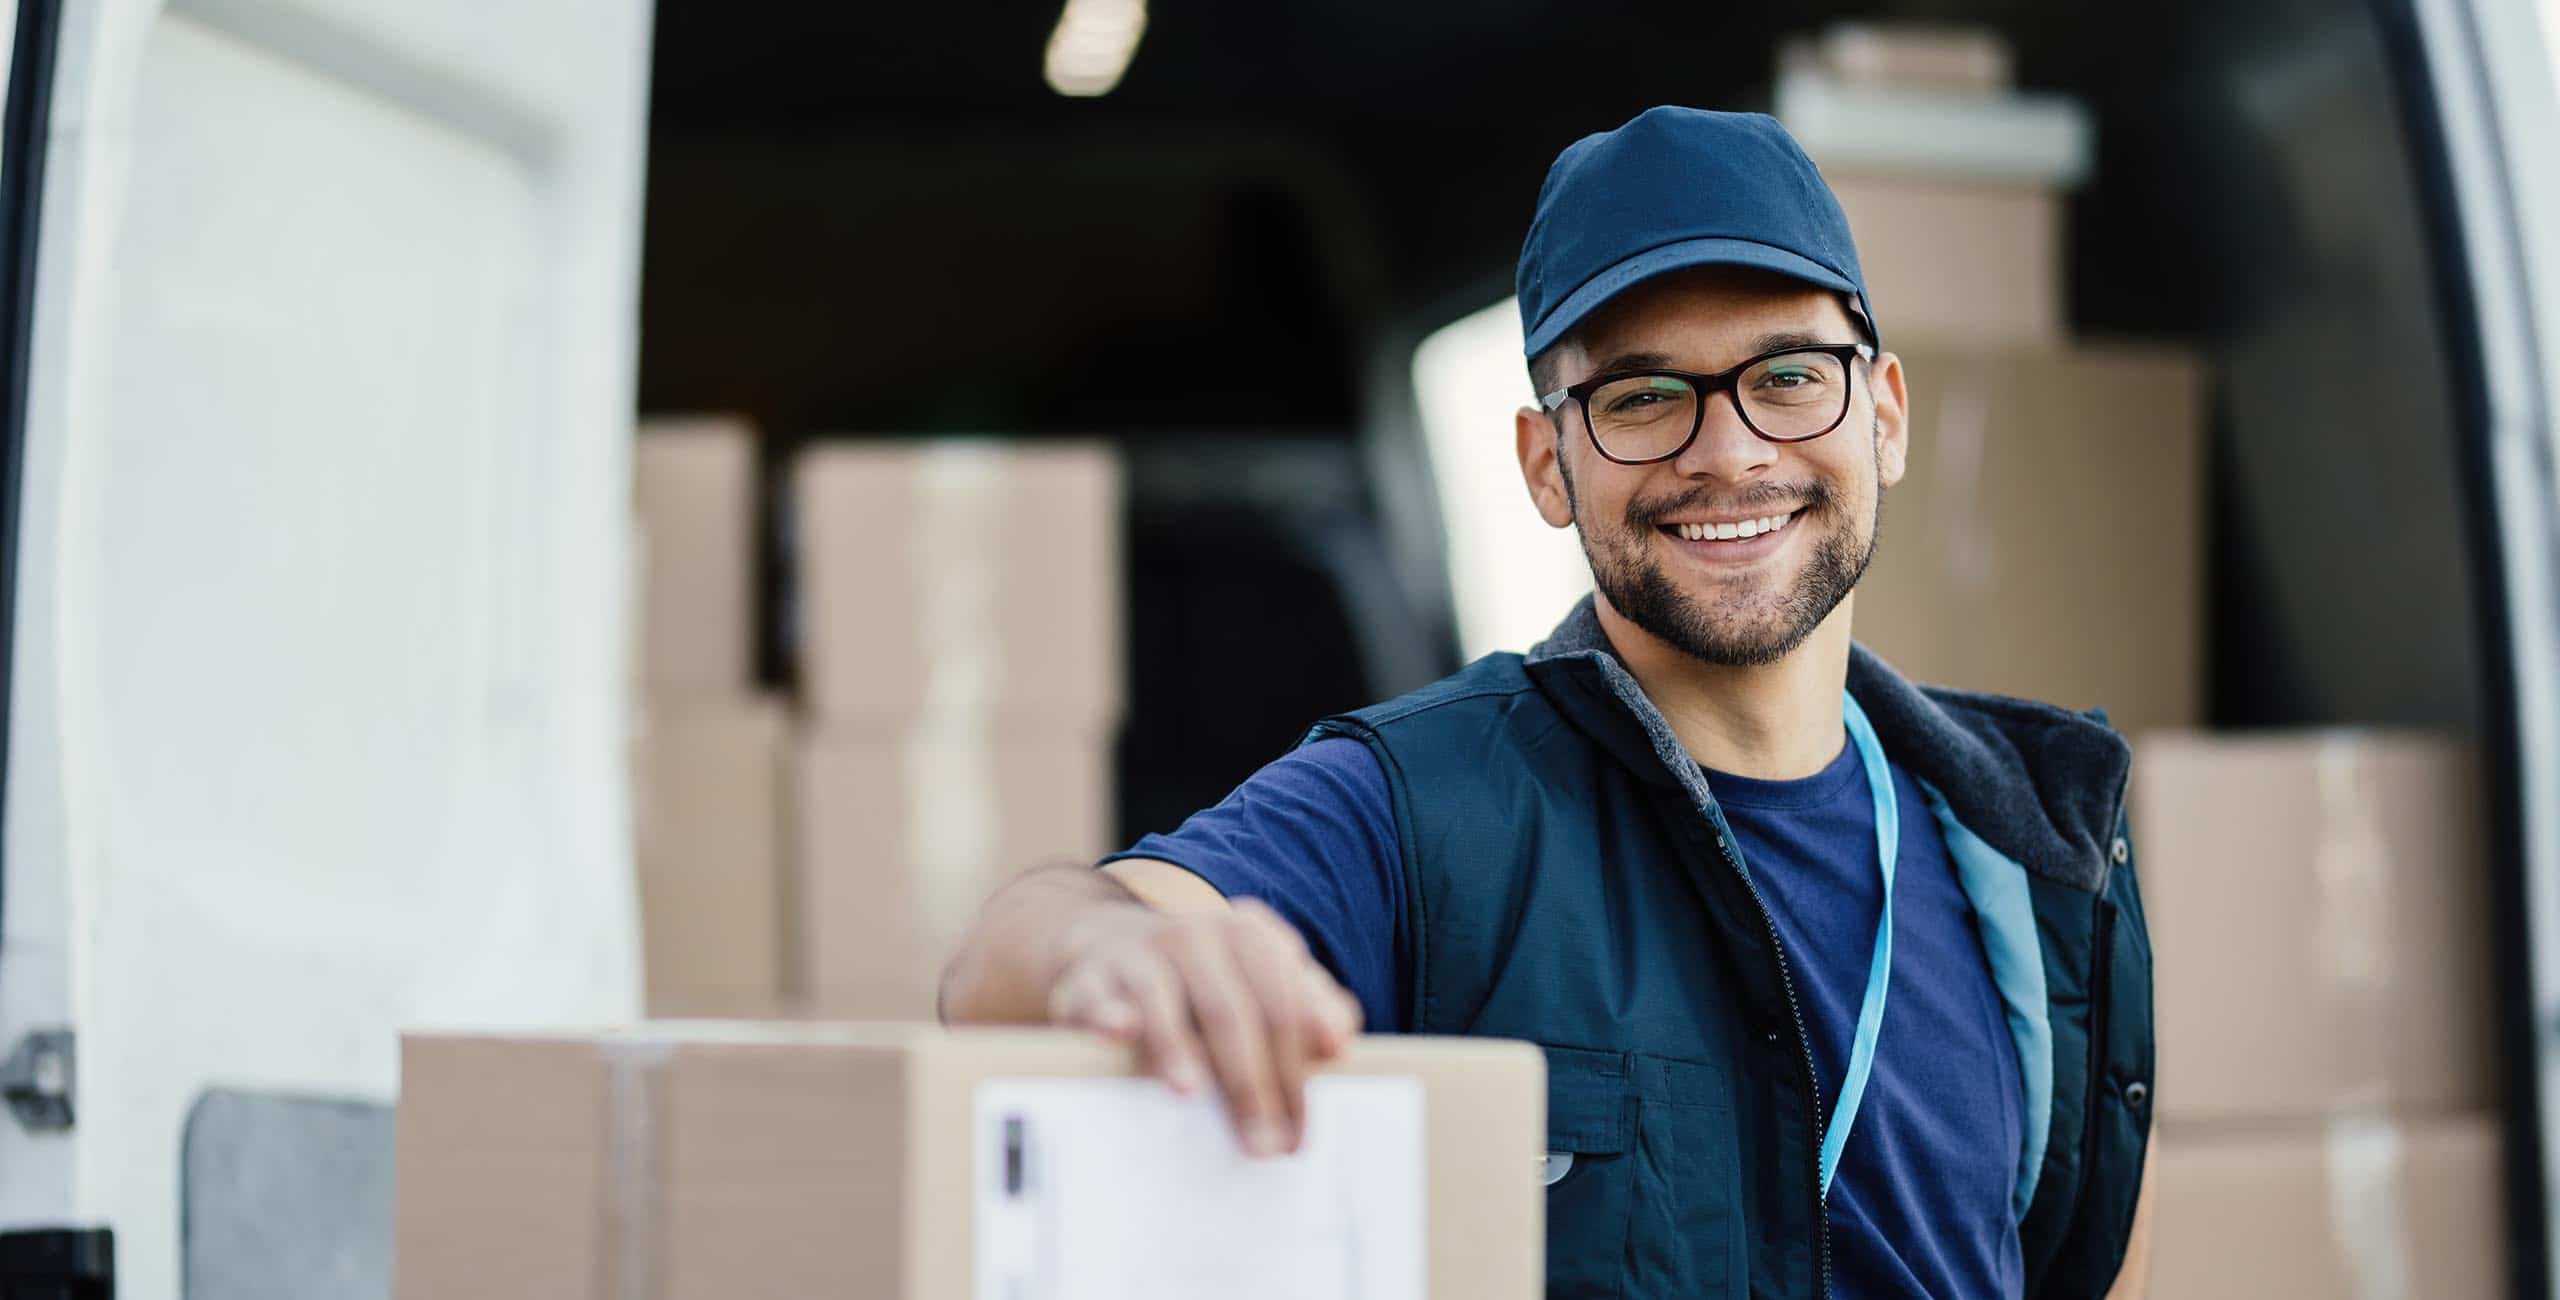 Delivery driver jobs employment in atlanta